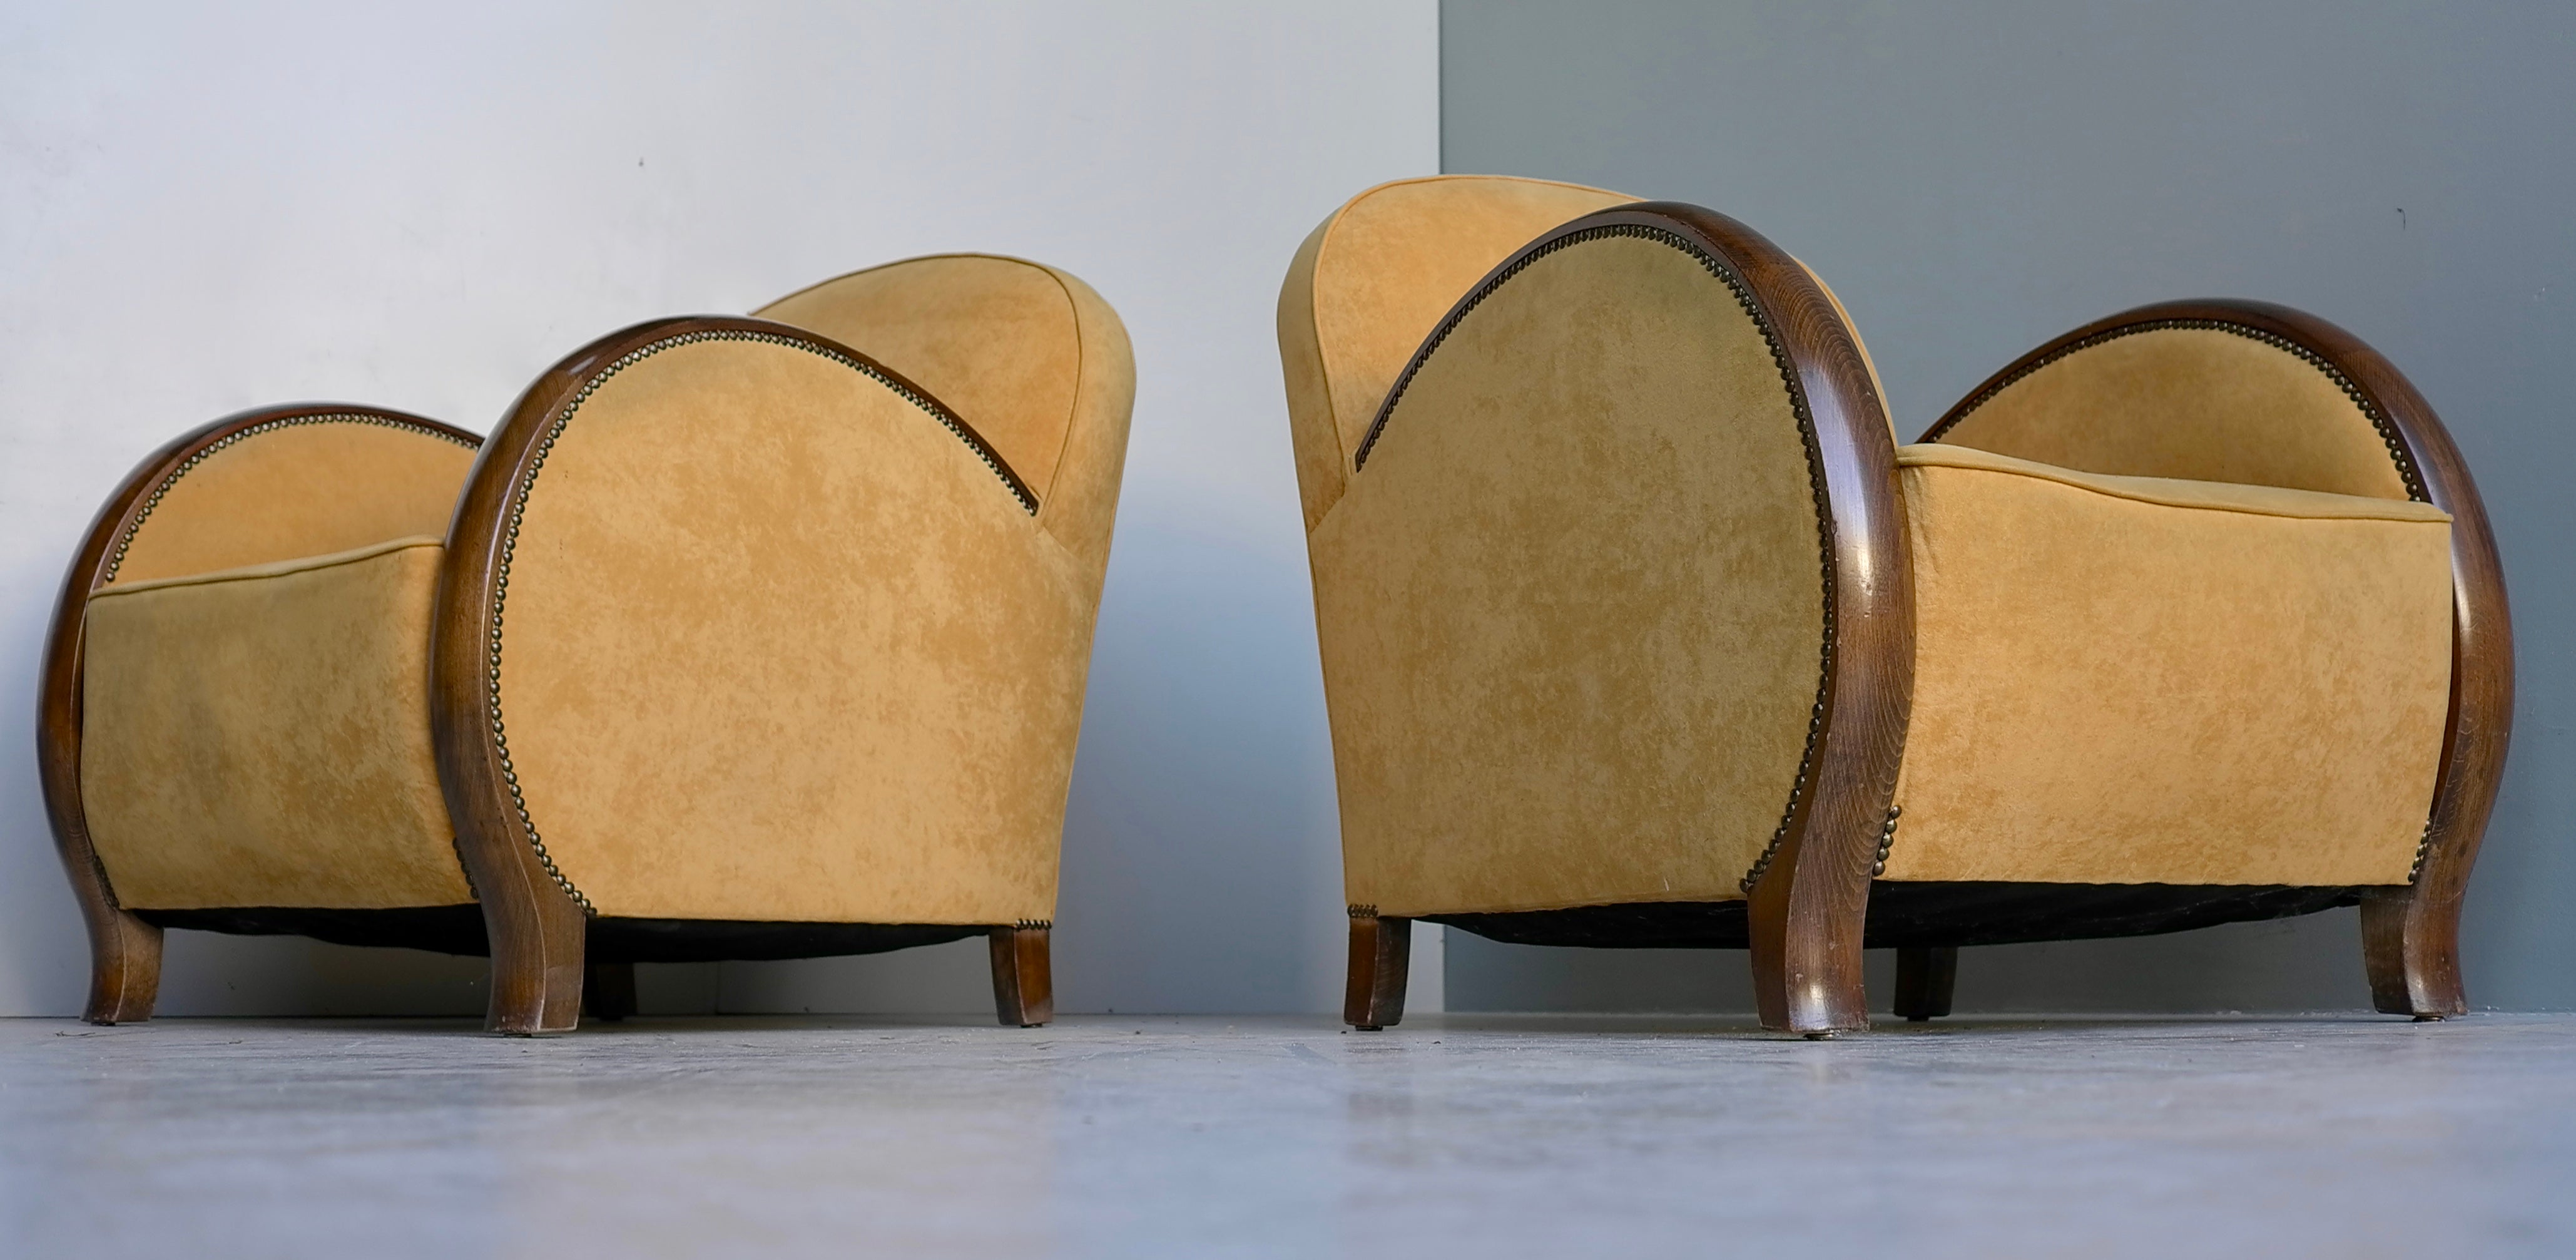 Pair of Art Deco Streamlined Armchairs in yellow Velvet with Wooden arms 1930's In Good Condition For Sale In Den Haag, NL